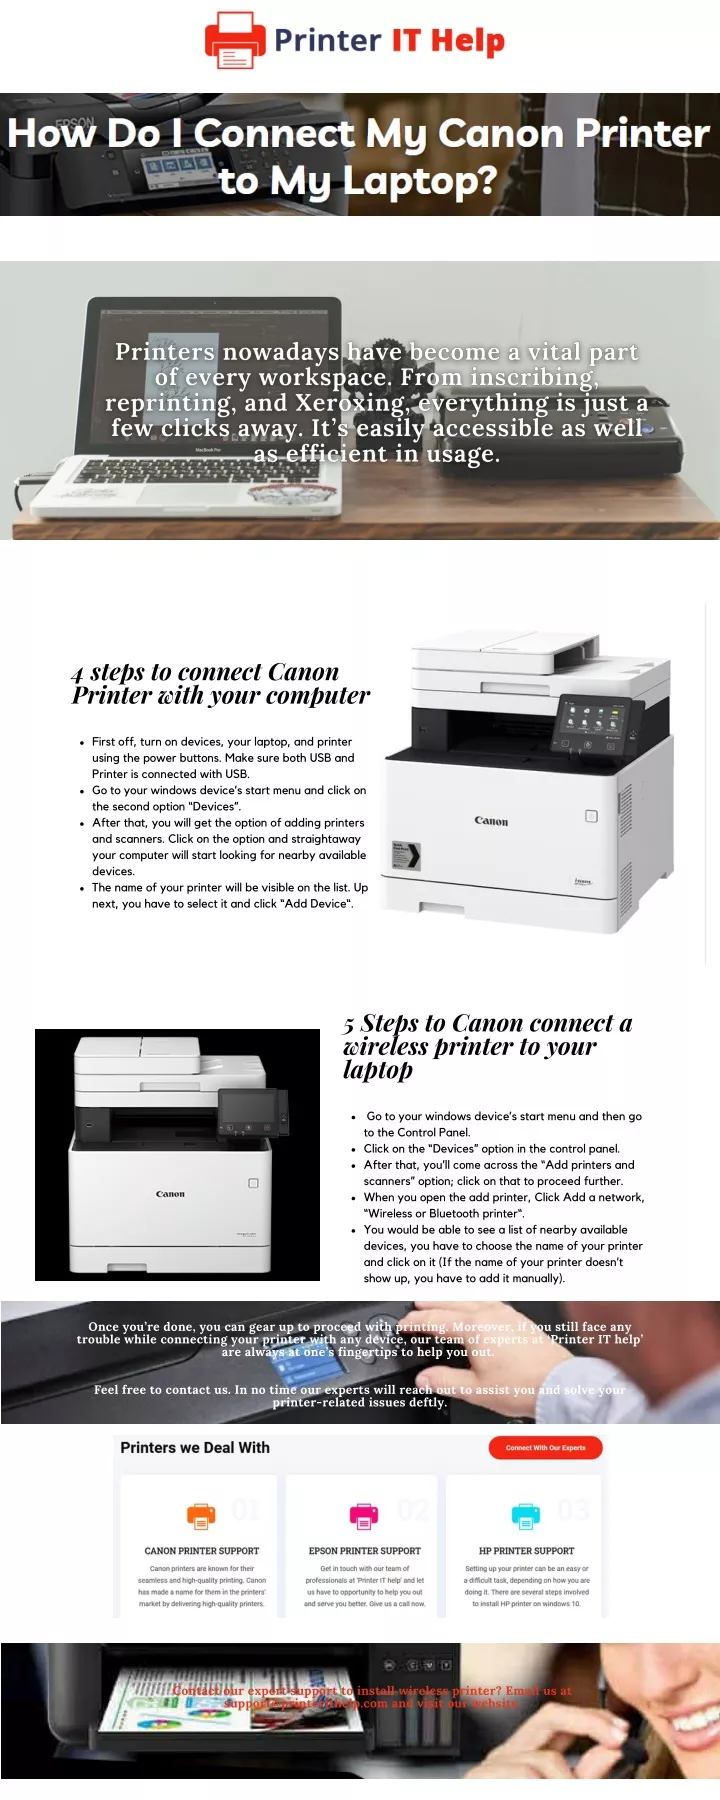 4 steps to connect canon printer with your